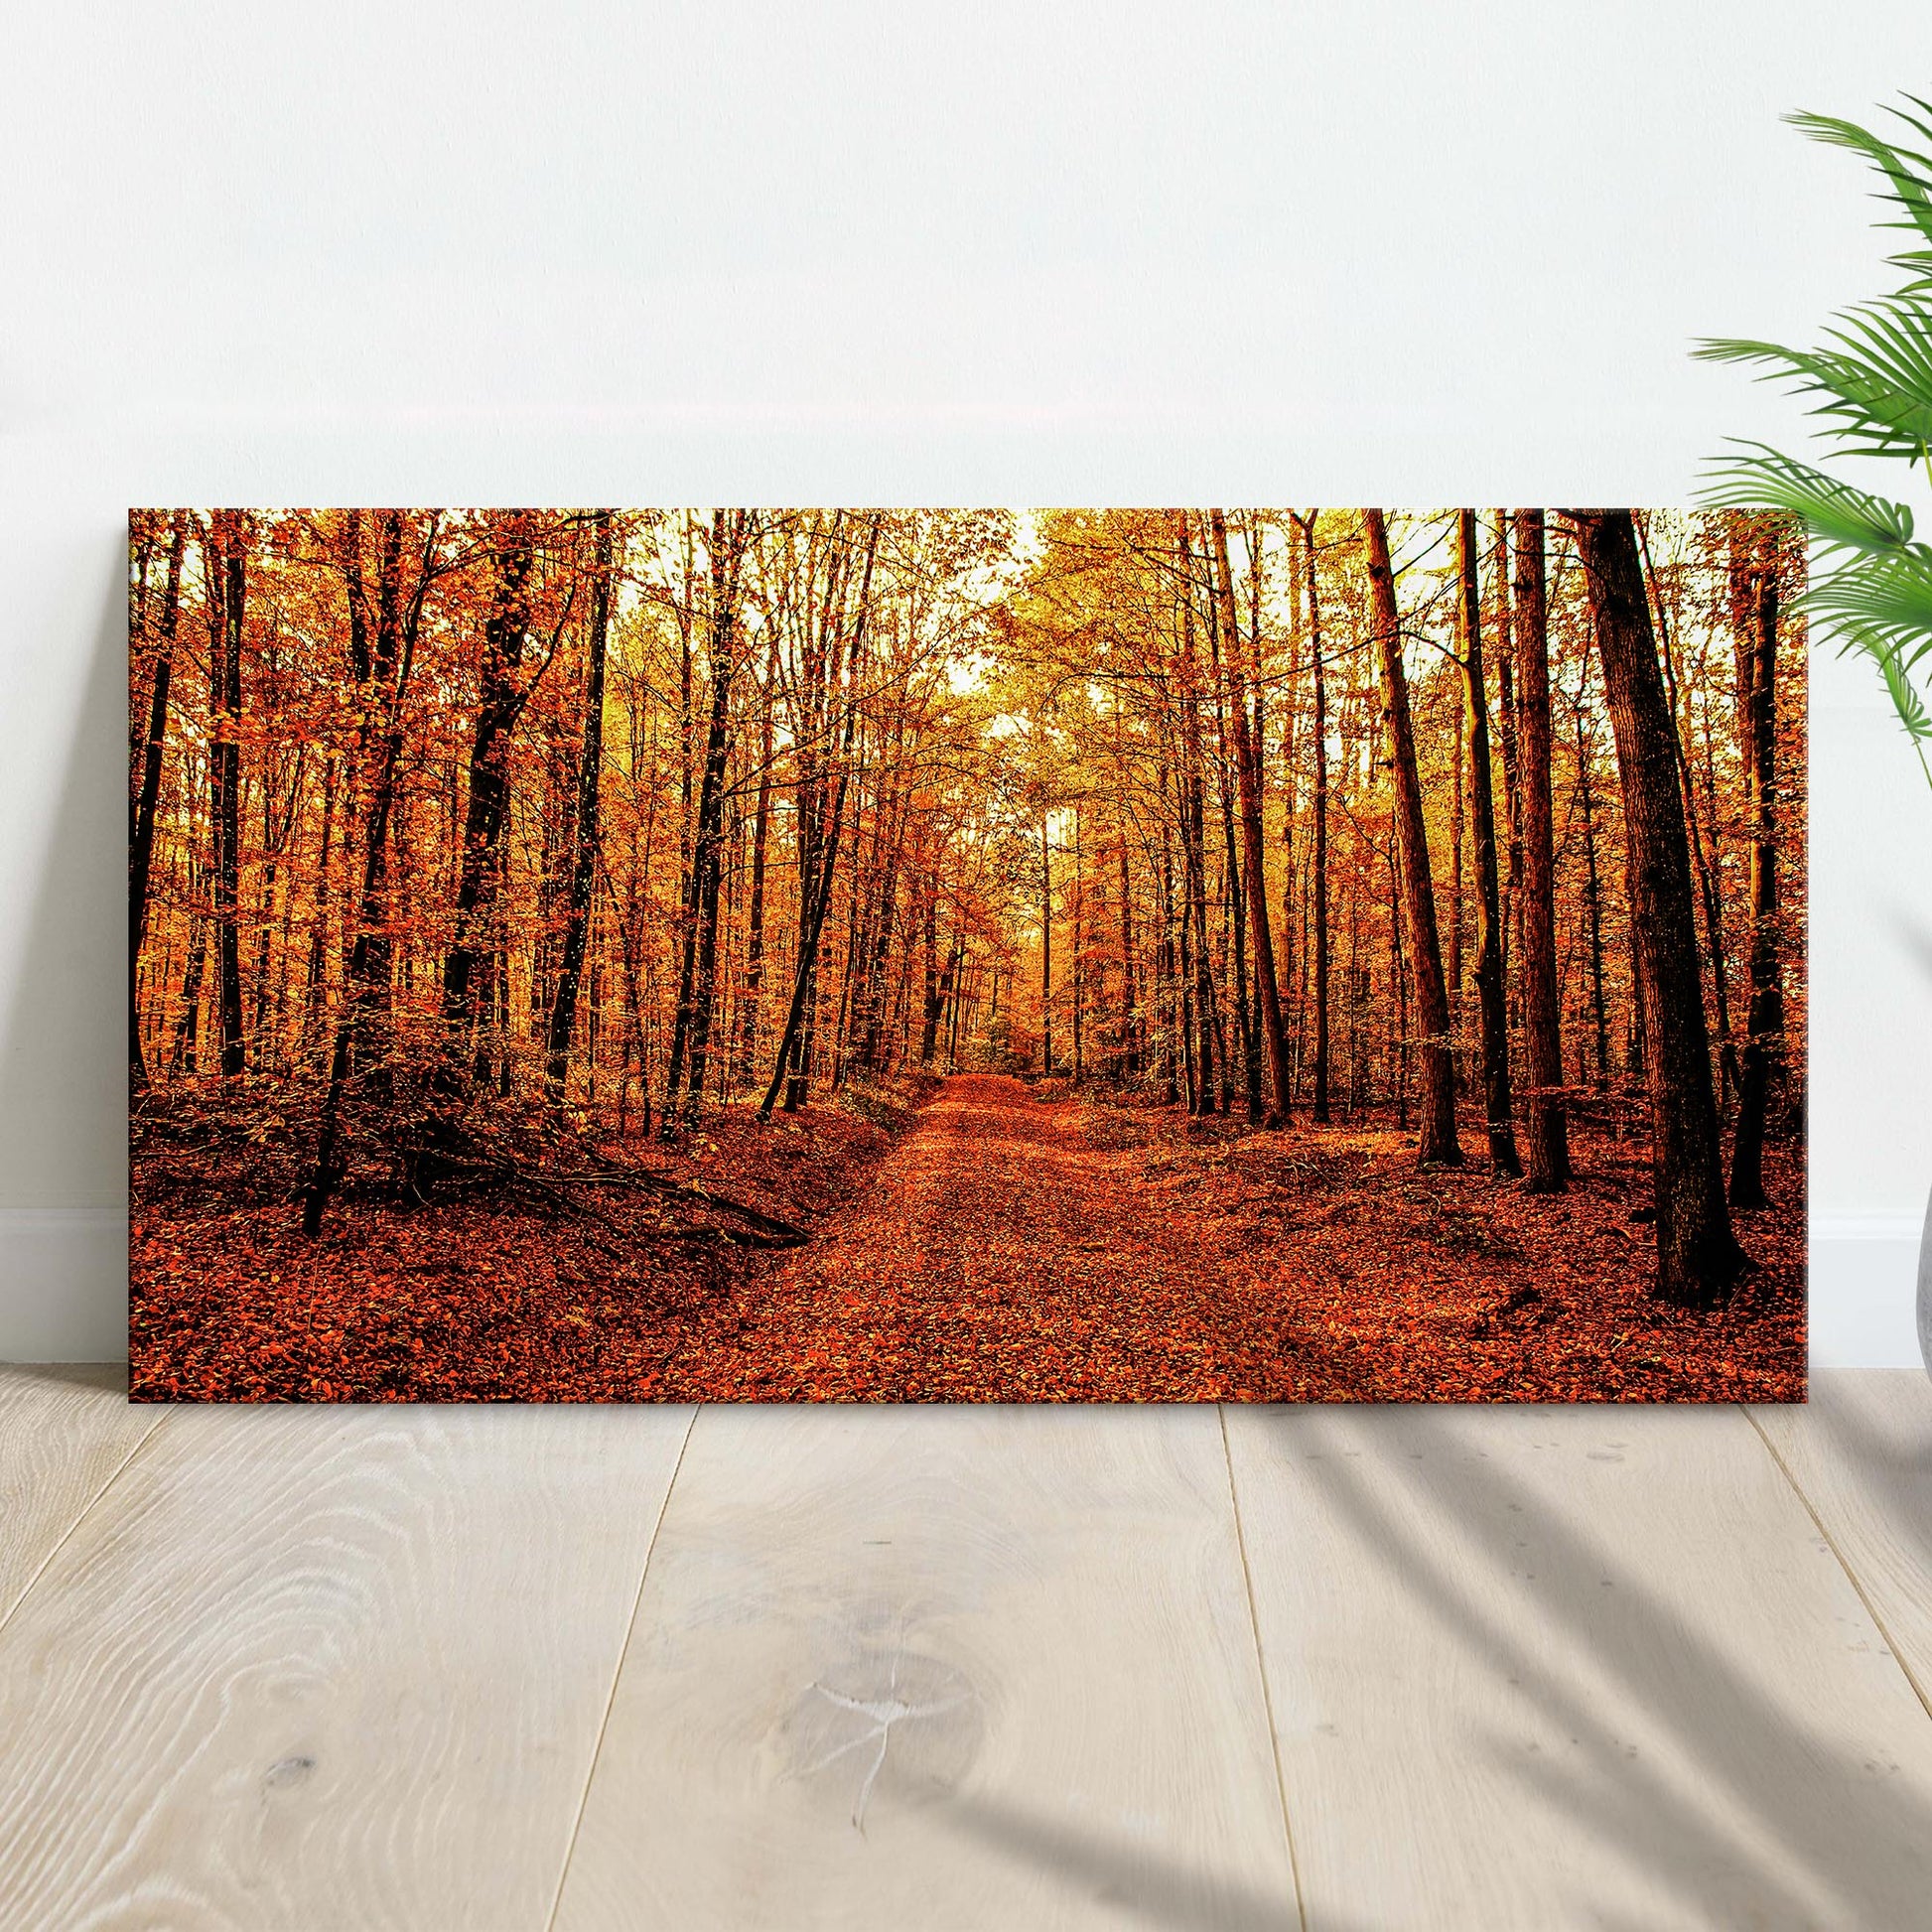 Autumn Tree Forest Canvas Wall Art - Image by Tailored Canvases